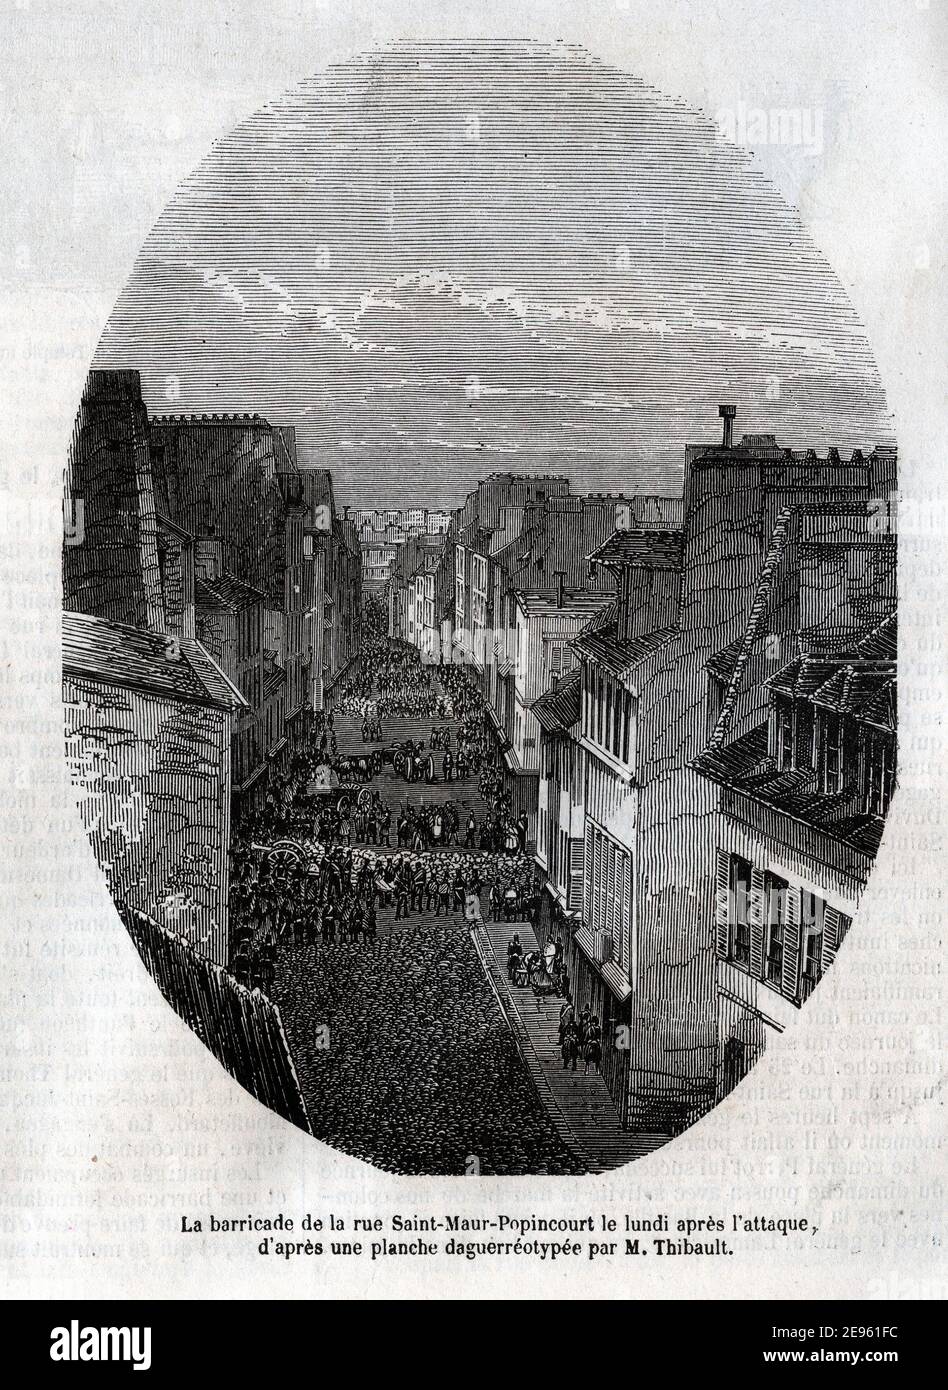 Engraving based on a daguerreotype entitled 'The barricade in Rue Saint-Maur-Popincourt after the attack by General Lamoricière's troops,' June 26, 1848. Daguerreotype by Charles-Francois Thibault. Stock Photo